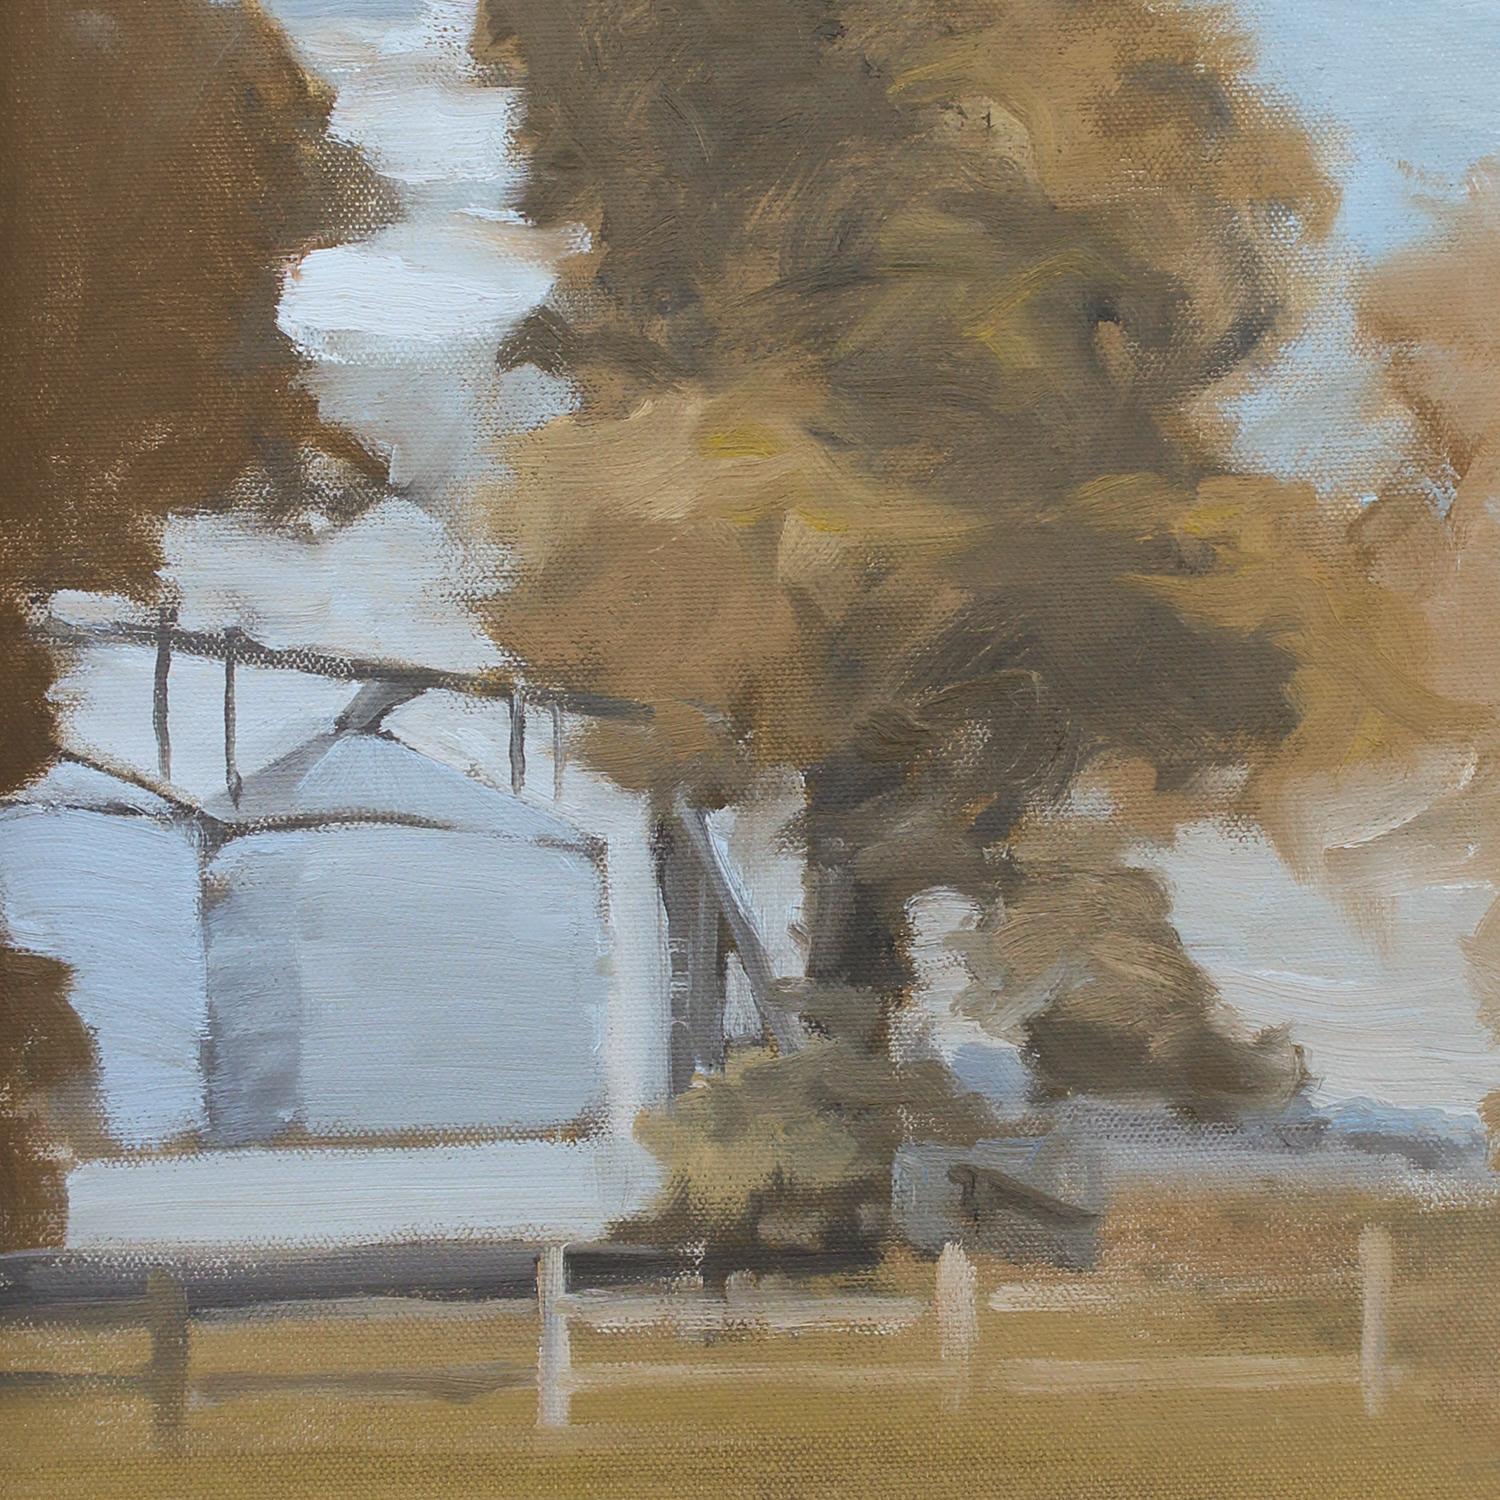 'Inglewood 6-2-2020' - plein air landscape - architectural painting 